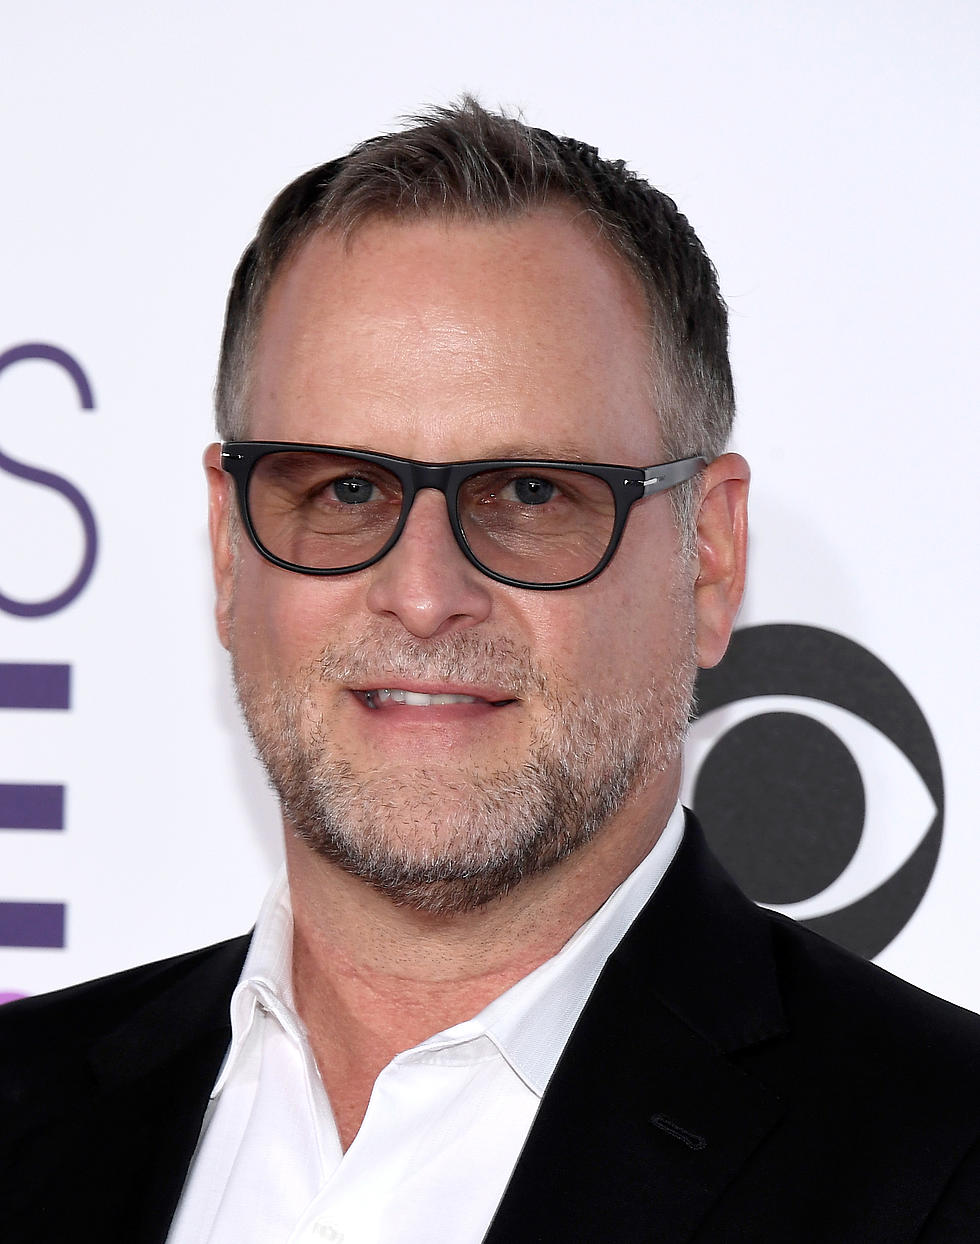 Dave Coulier From “Full House” Is Moving Home To Michigan